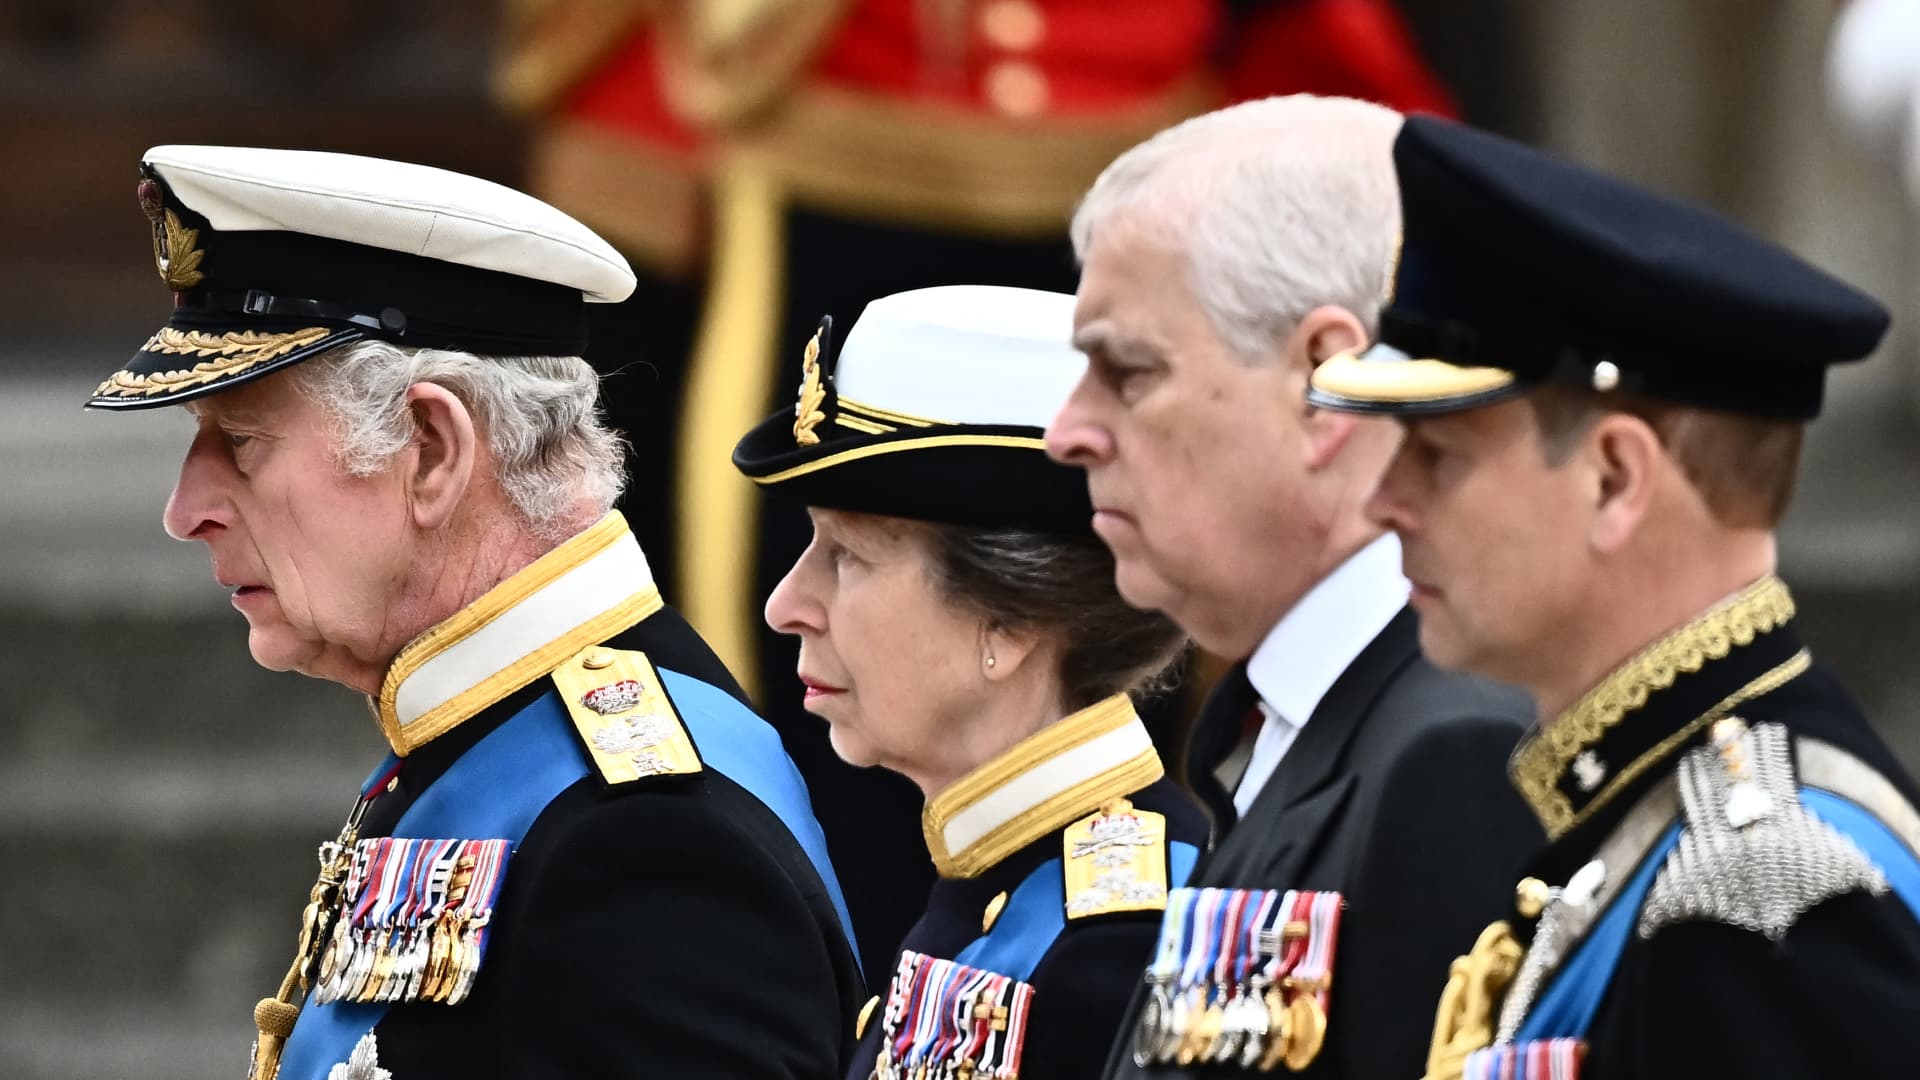 Britain's King Charles III, Britain's Princess Anne, Princess Royal, Britain's Prince Andrew, Duke of York and Britain's Prince Edward, Earl of Wessex arrive at Westminster Abbey in London on September 19, 2022, for the State Funeral Service for Britain's Queen Elizabeth II.